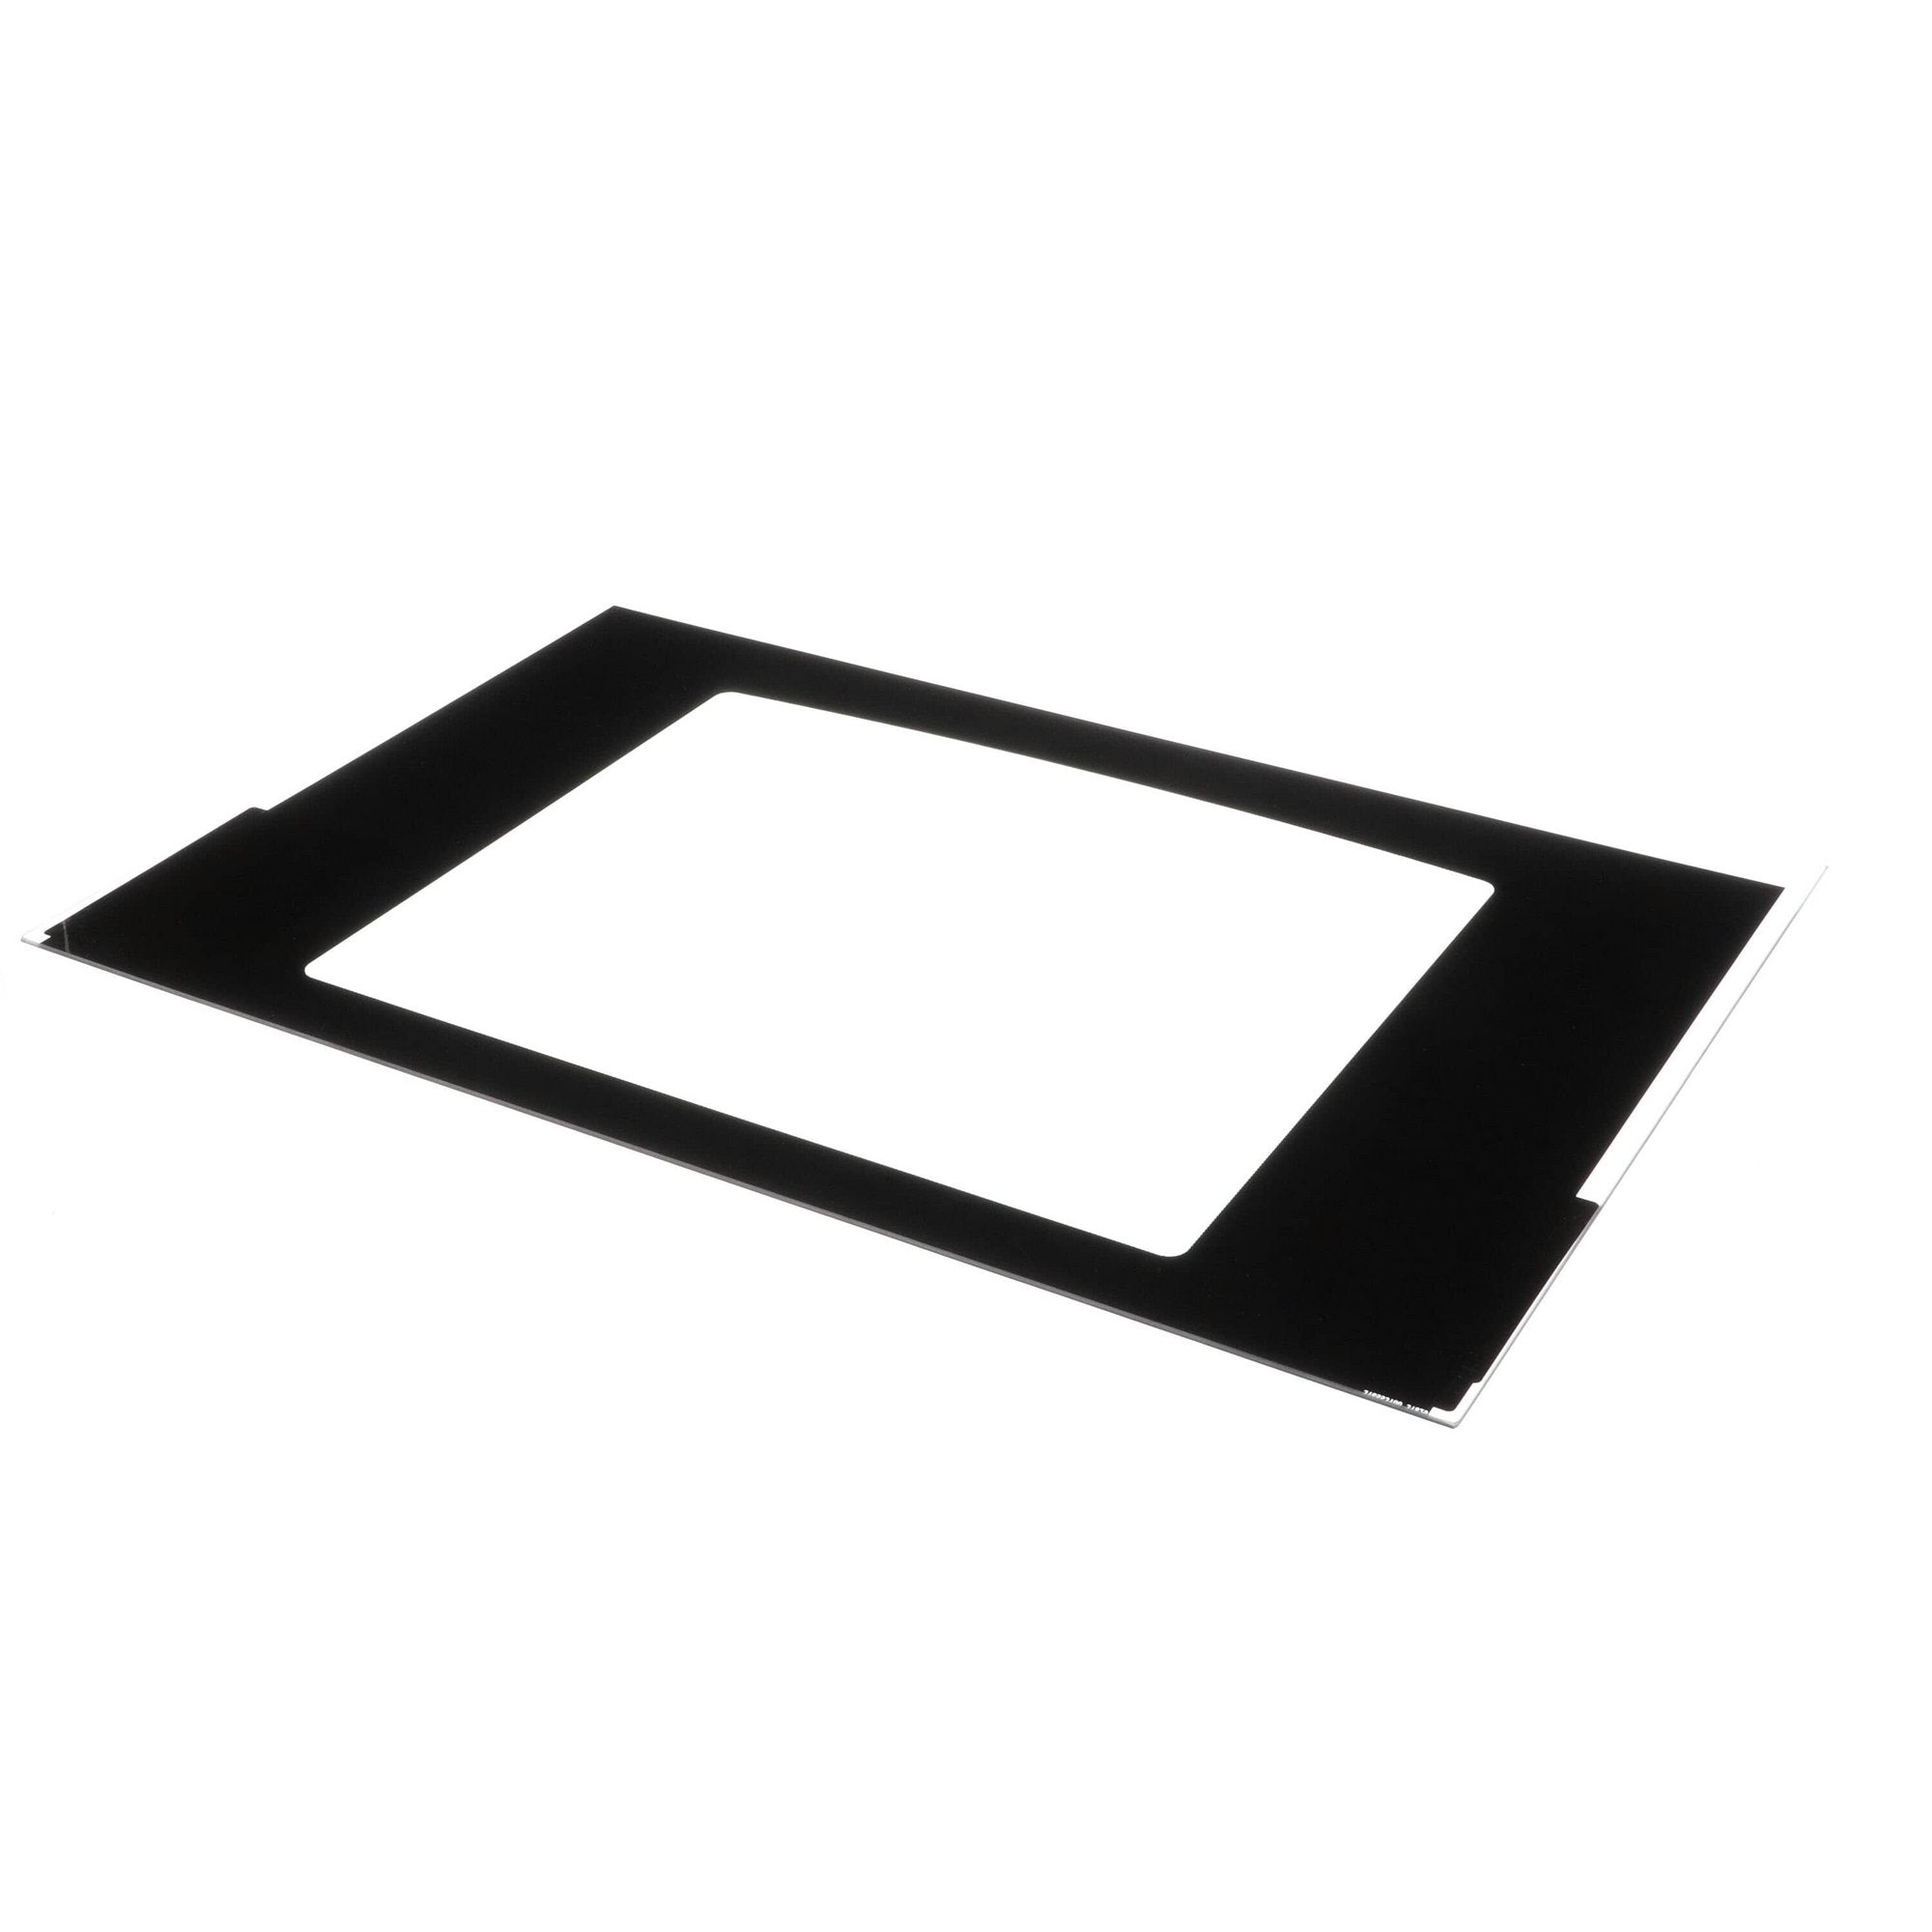 Electrolux Glass Oven Door (Black with Foil) - 316452717 New